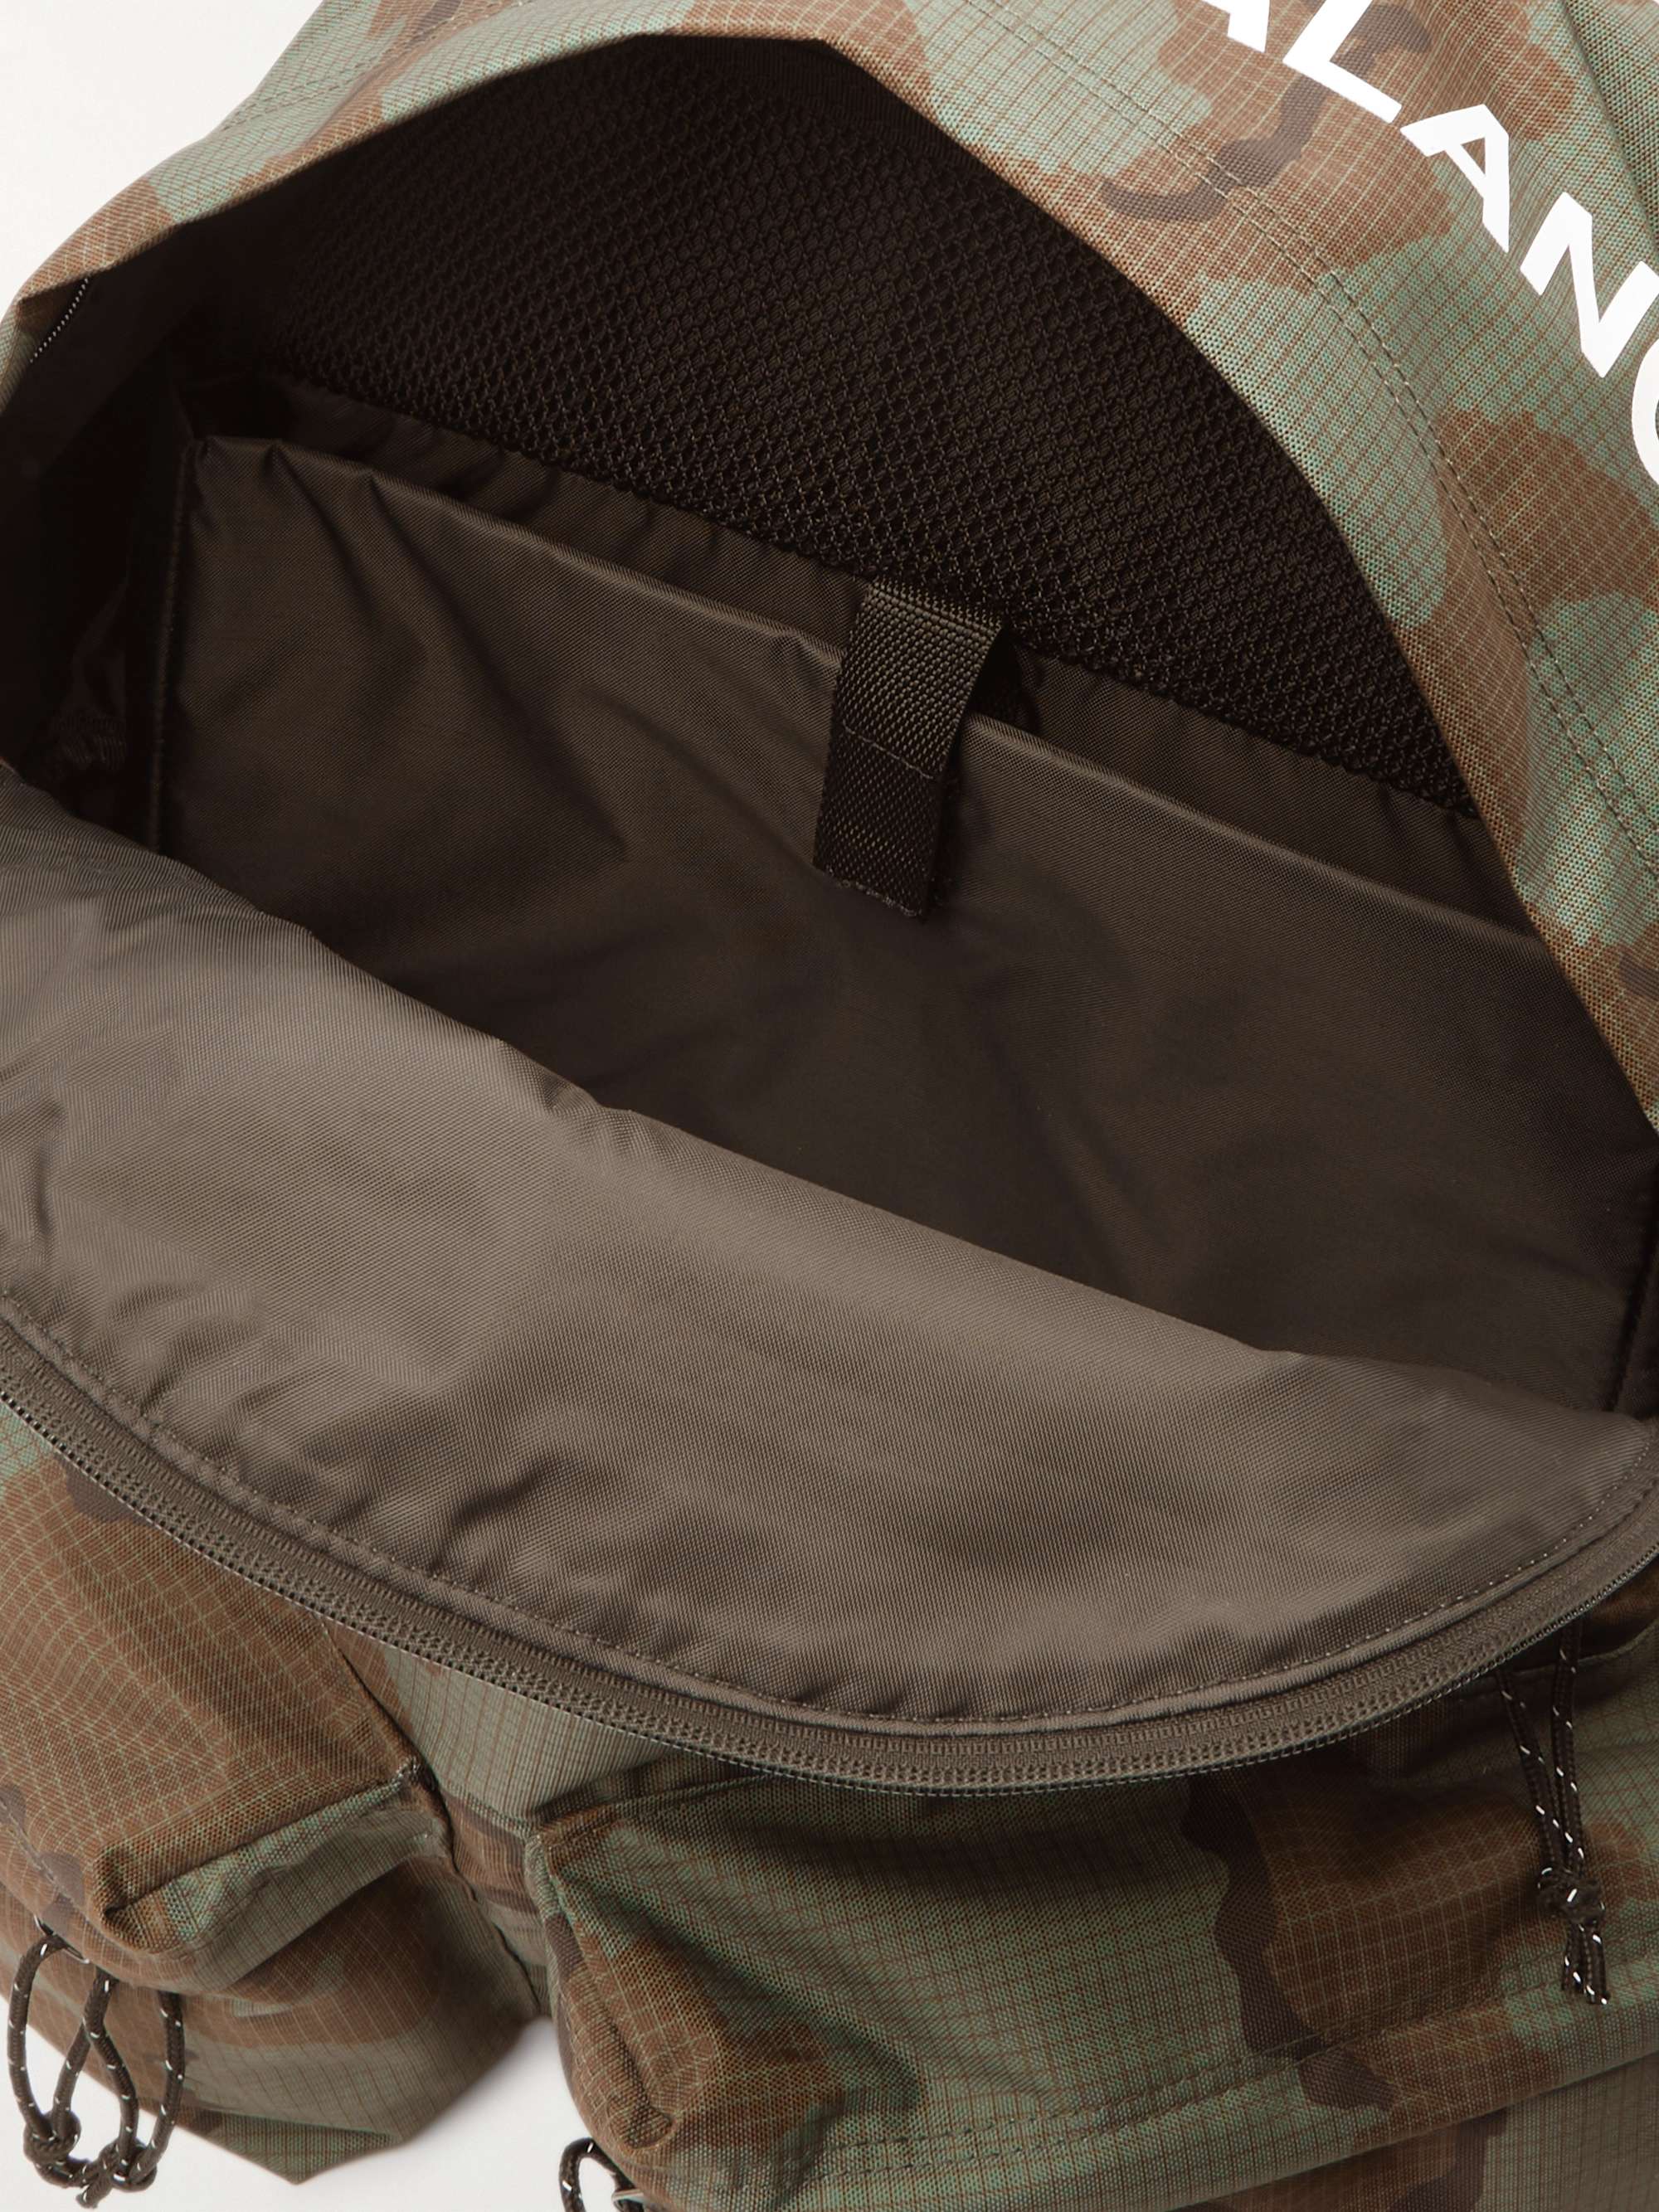 Green + Eastpak Chaos Balance Camouflage-Print Ripstop Backpack |  UNDERCOVER | MR PORTER